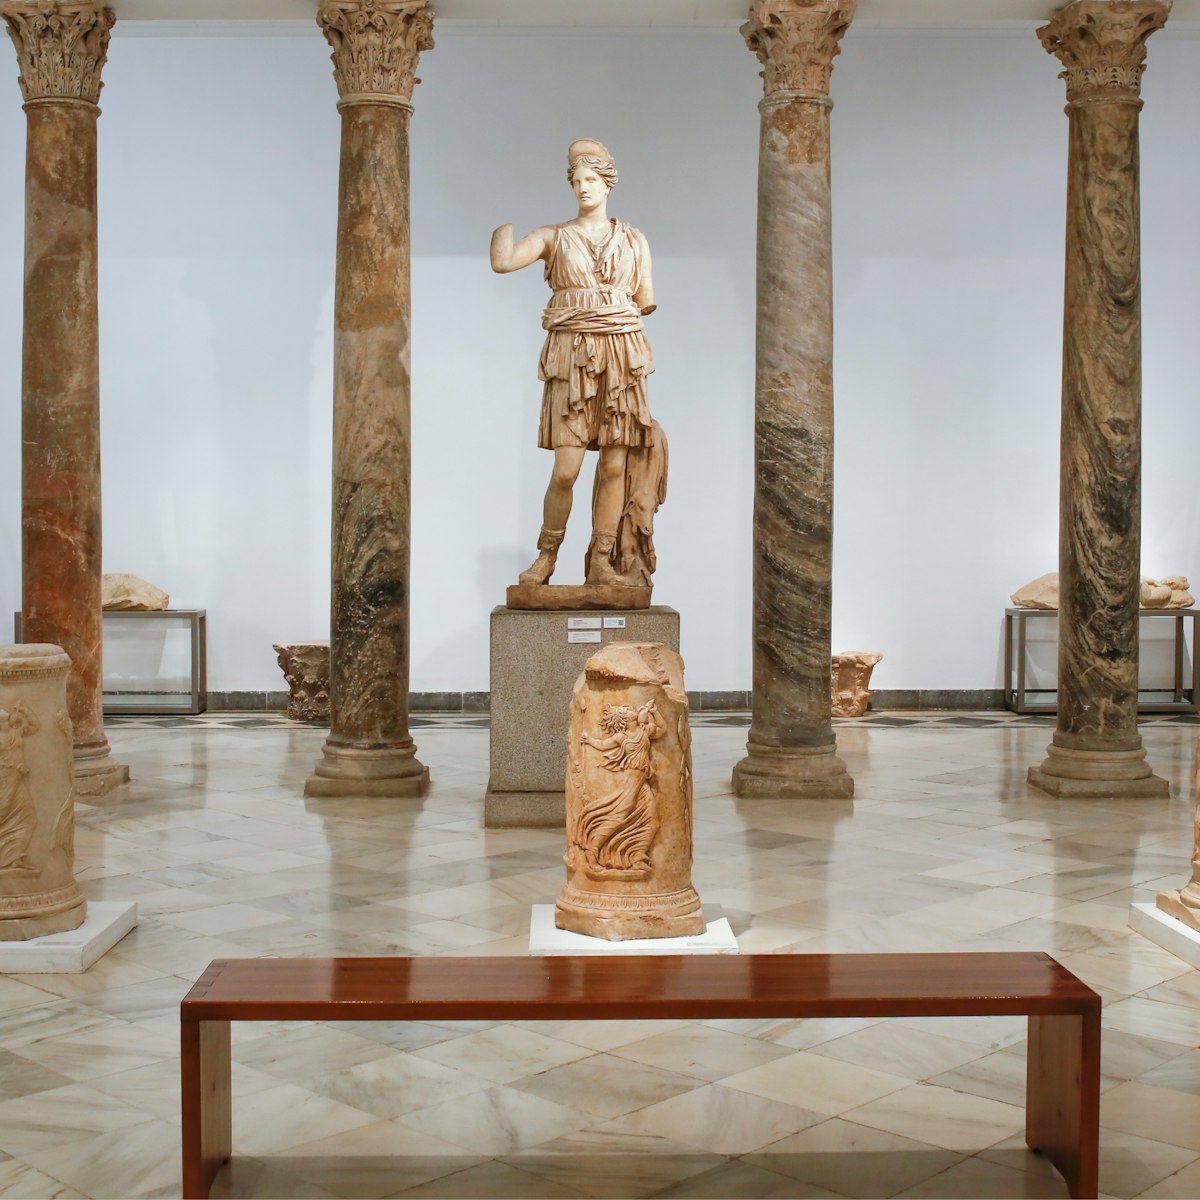 Archaeological Museum of Seville, Andalusia, Spain